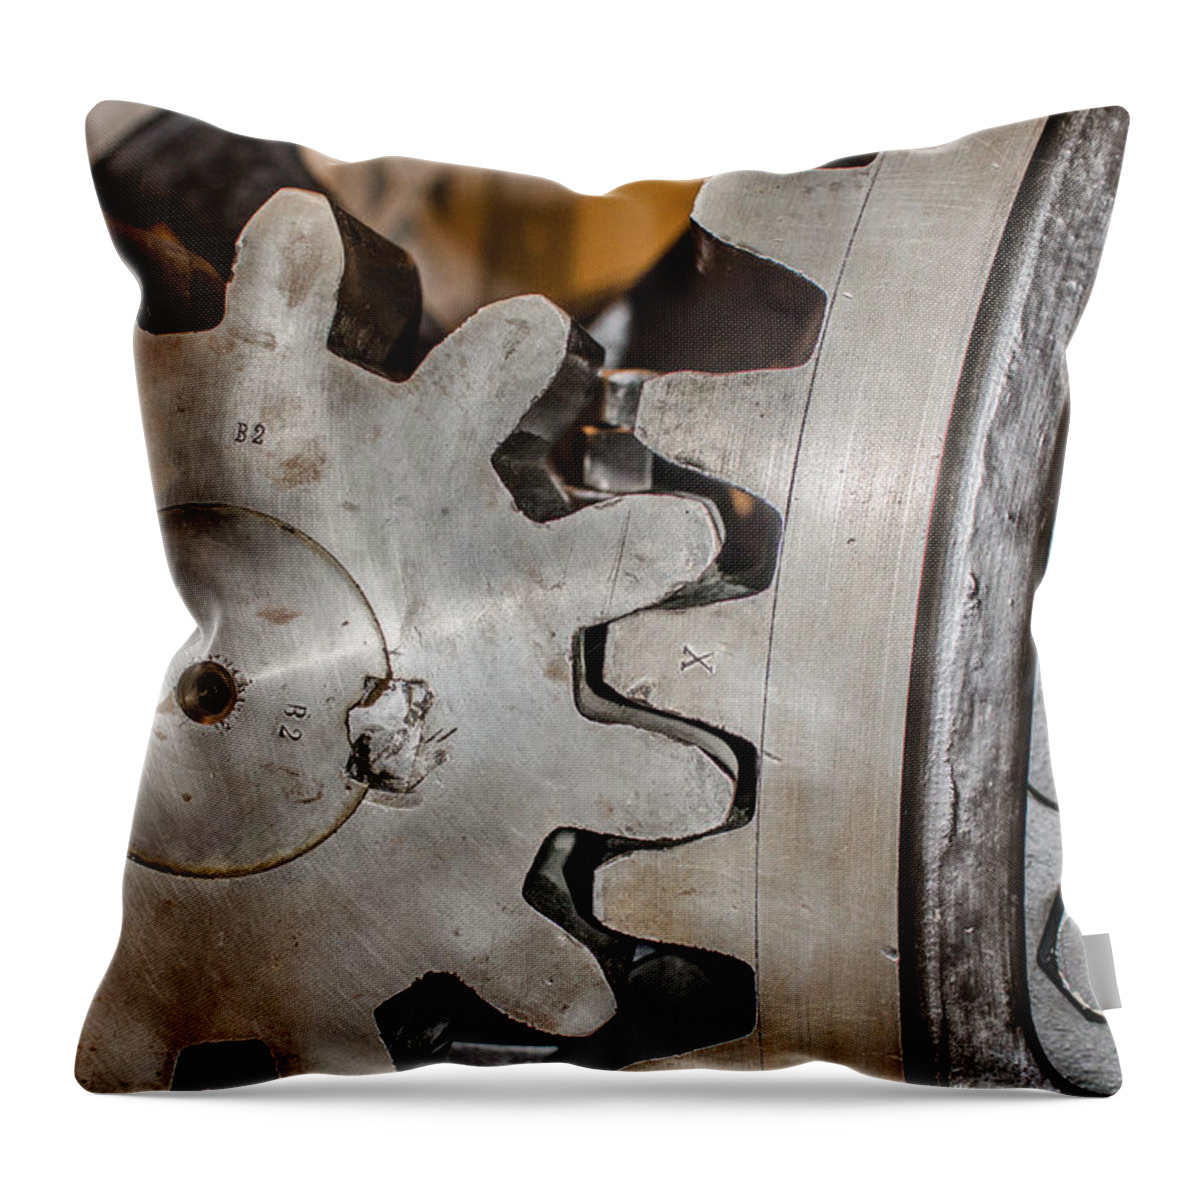 Cogwheels Throw Pillow featuring the photograph Cause And Effect by Andreas Berthold